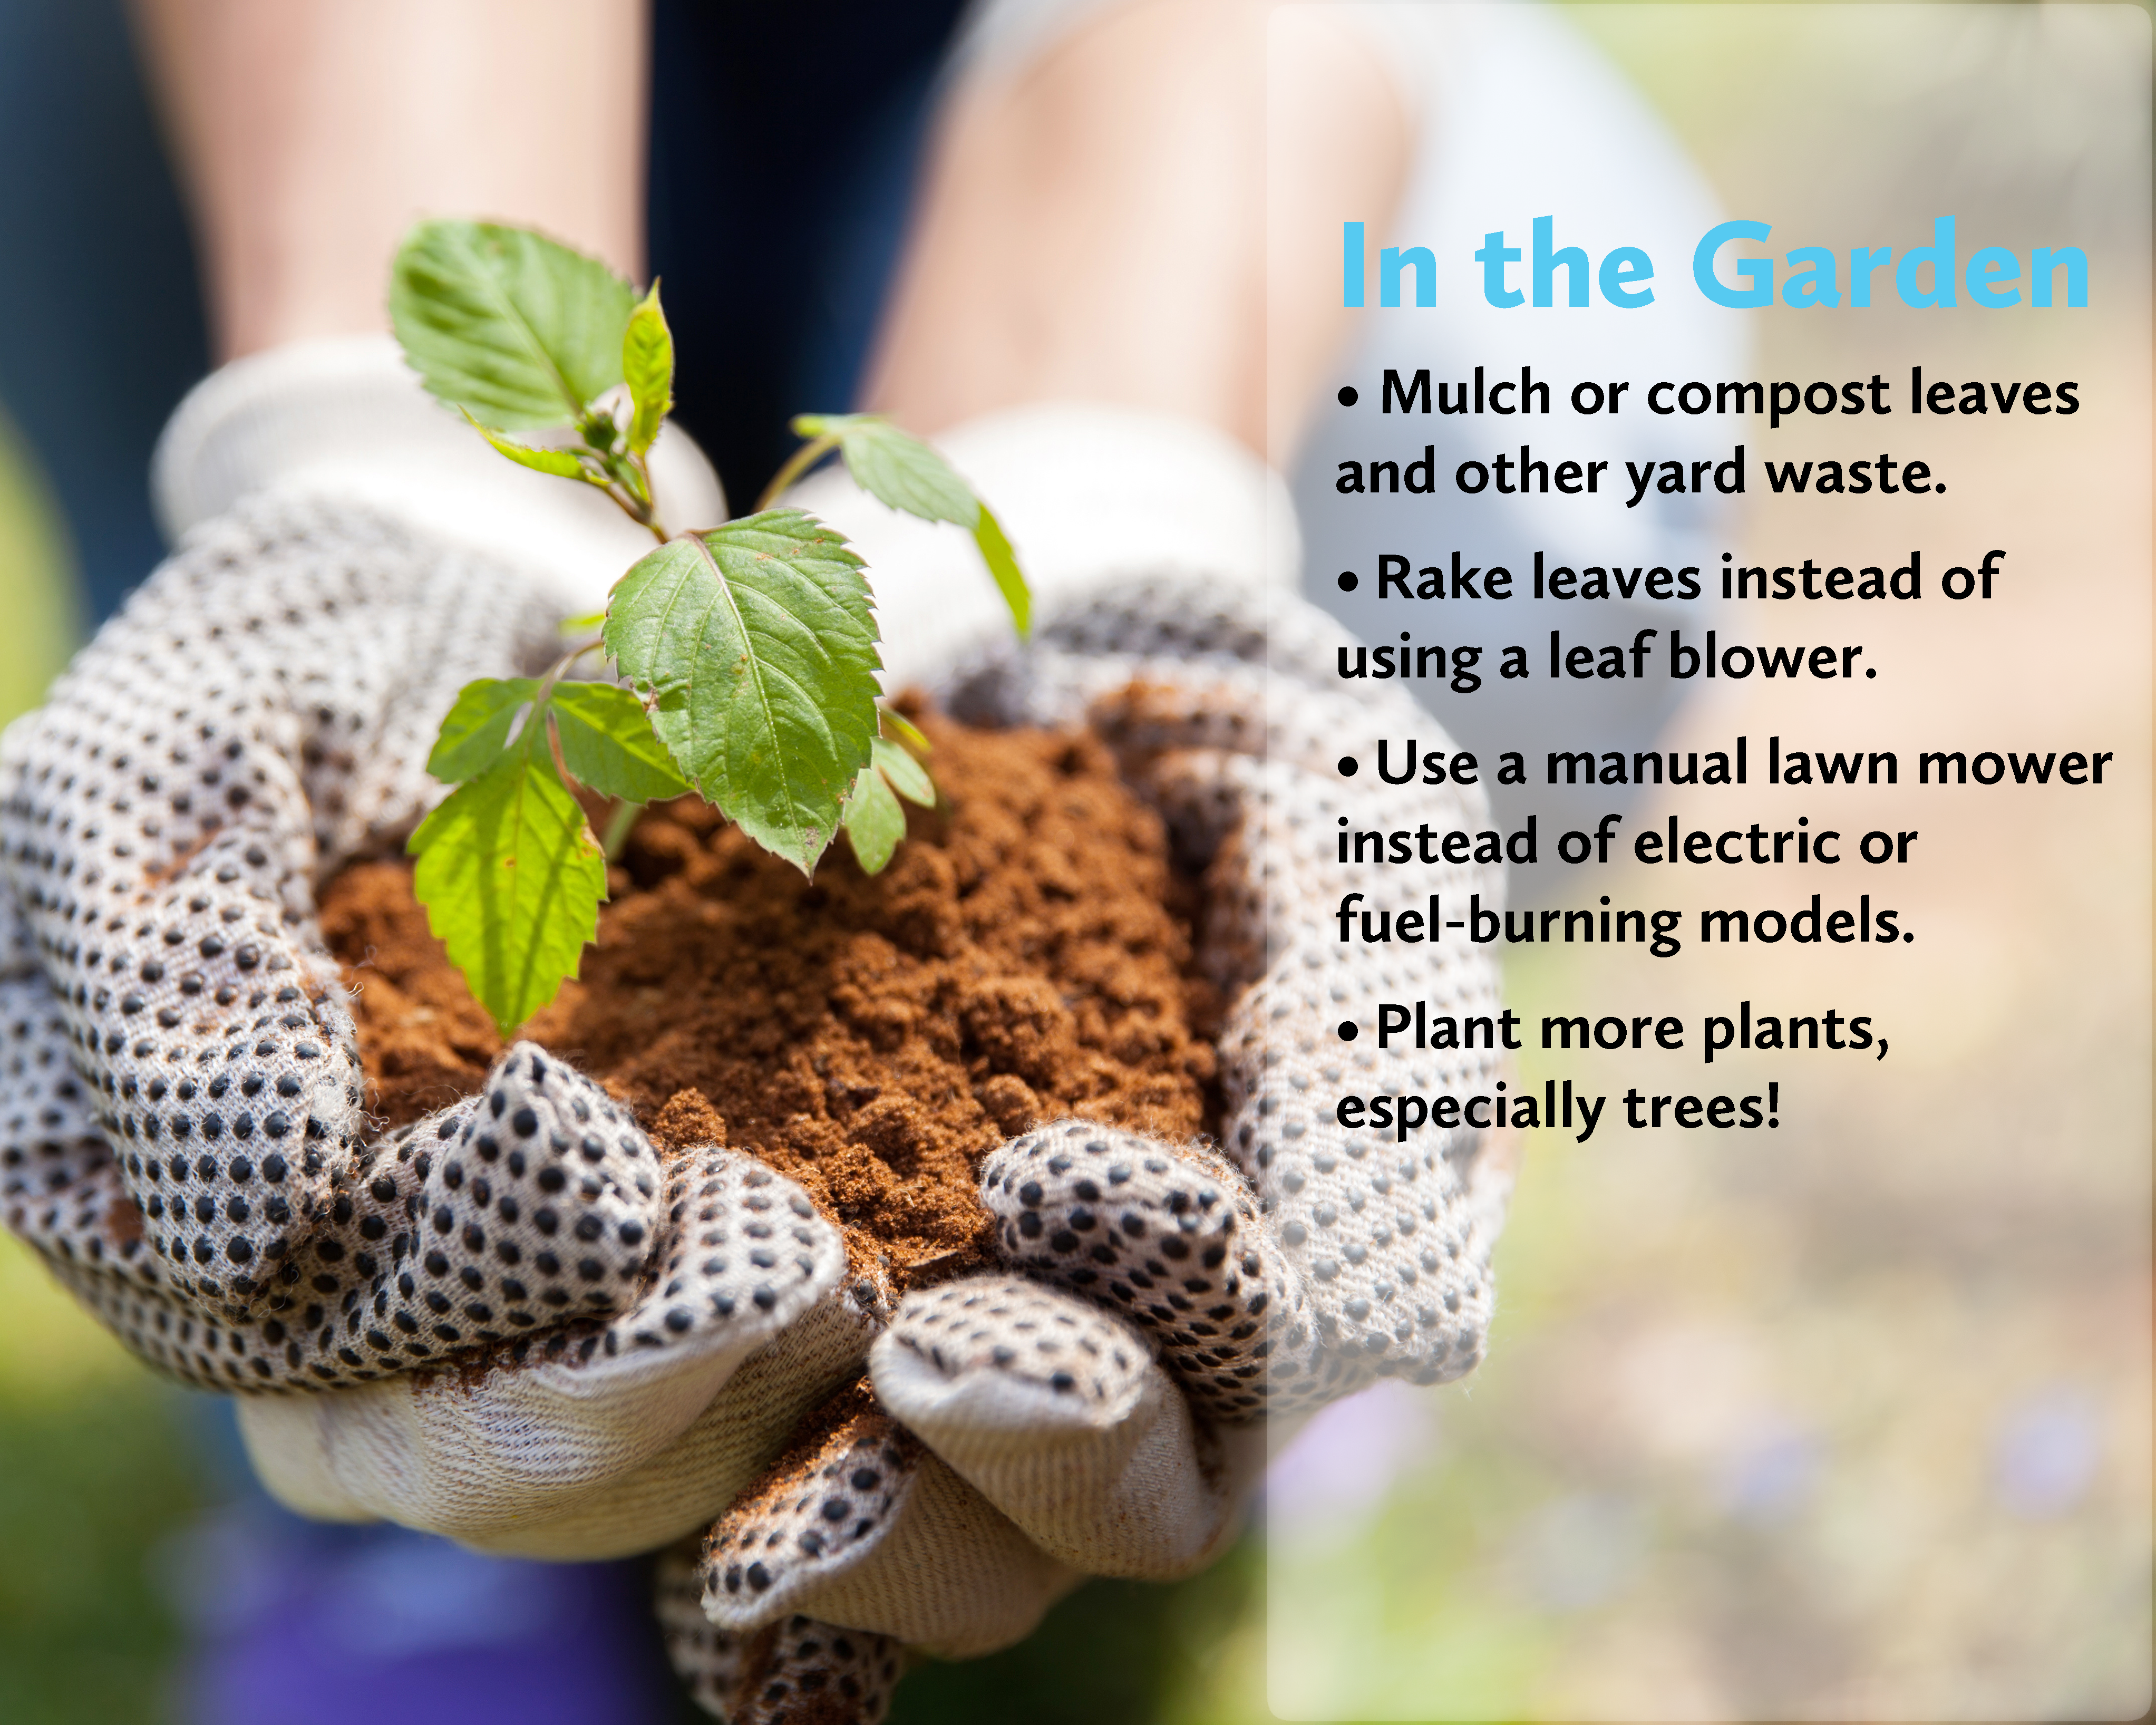 In the Garden. Mulch or compost leaves and other yard waste. Rake leaves instead of using a leaf blower. Use a manual lawn mower instead of electric or fuel-burning models. Plant more plants, especially trees!